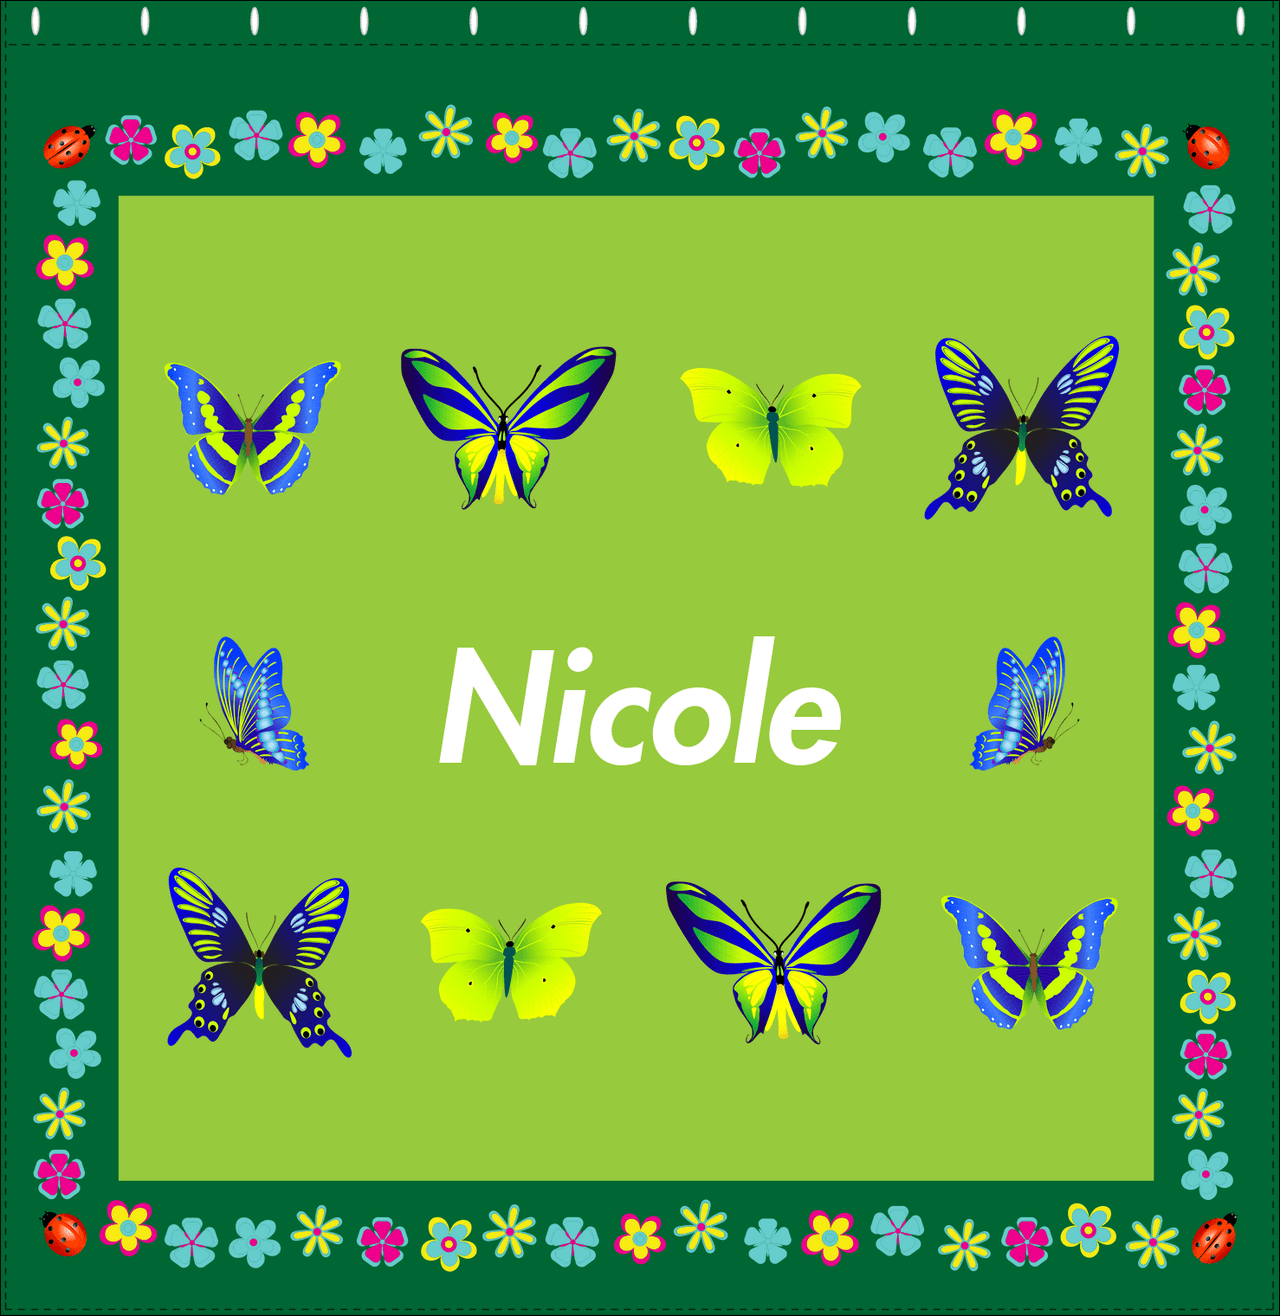 Personalized Butterfly Shower Curtain X - Green Background - Butterflies III - Decorate View